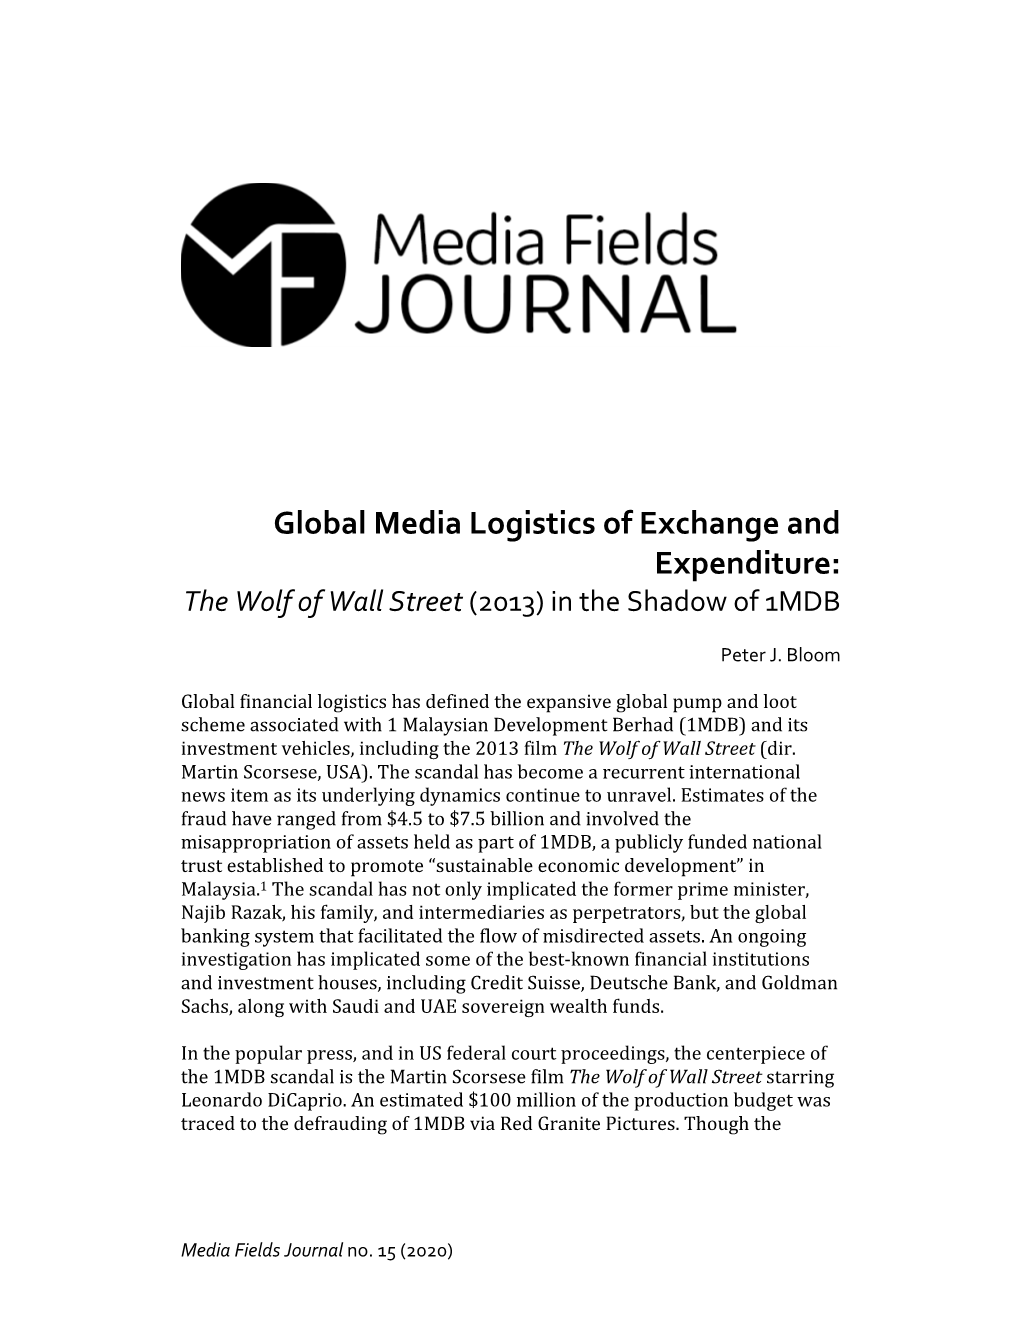 Global Media Logistics of Exchange and Expenditure: the Wolf of Wall Street (2013) in the Shadow of 1MDB